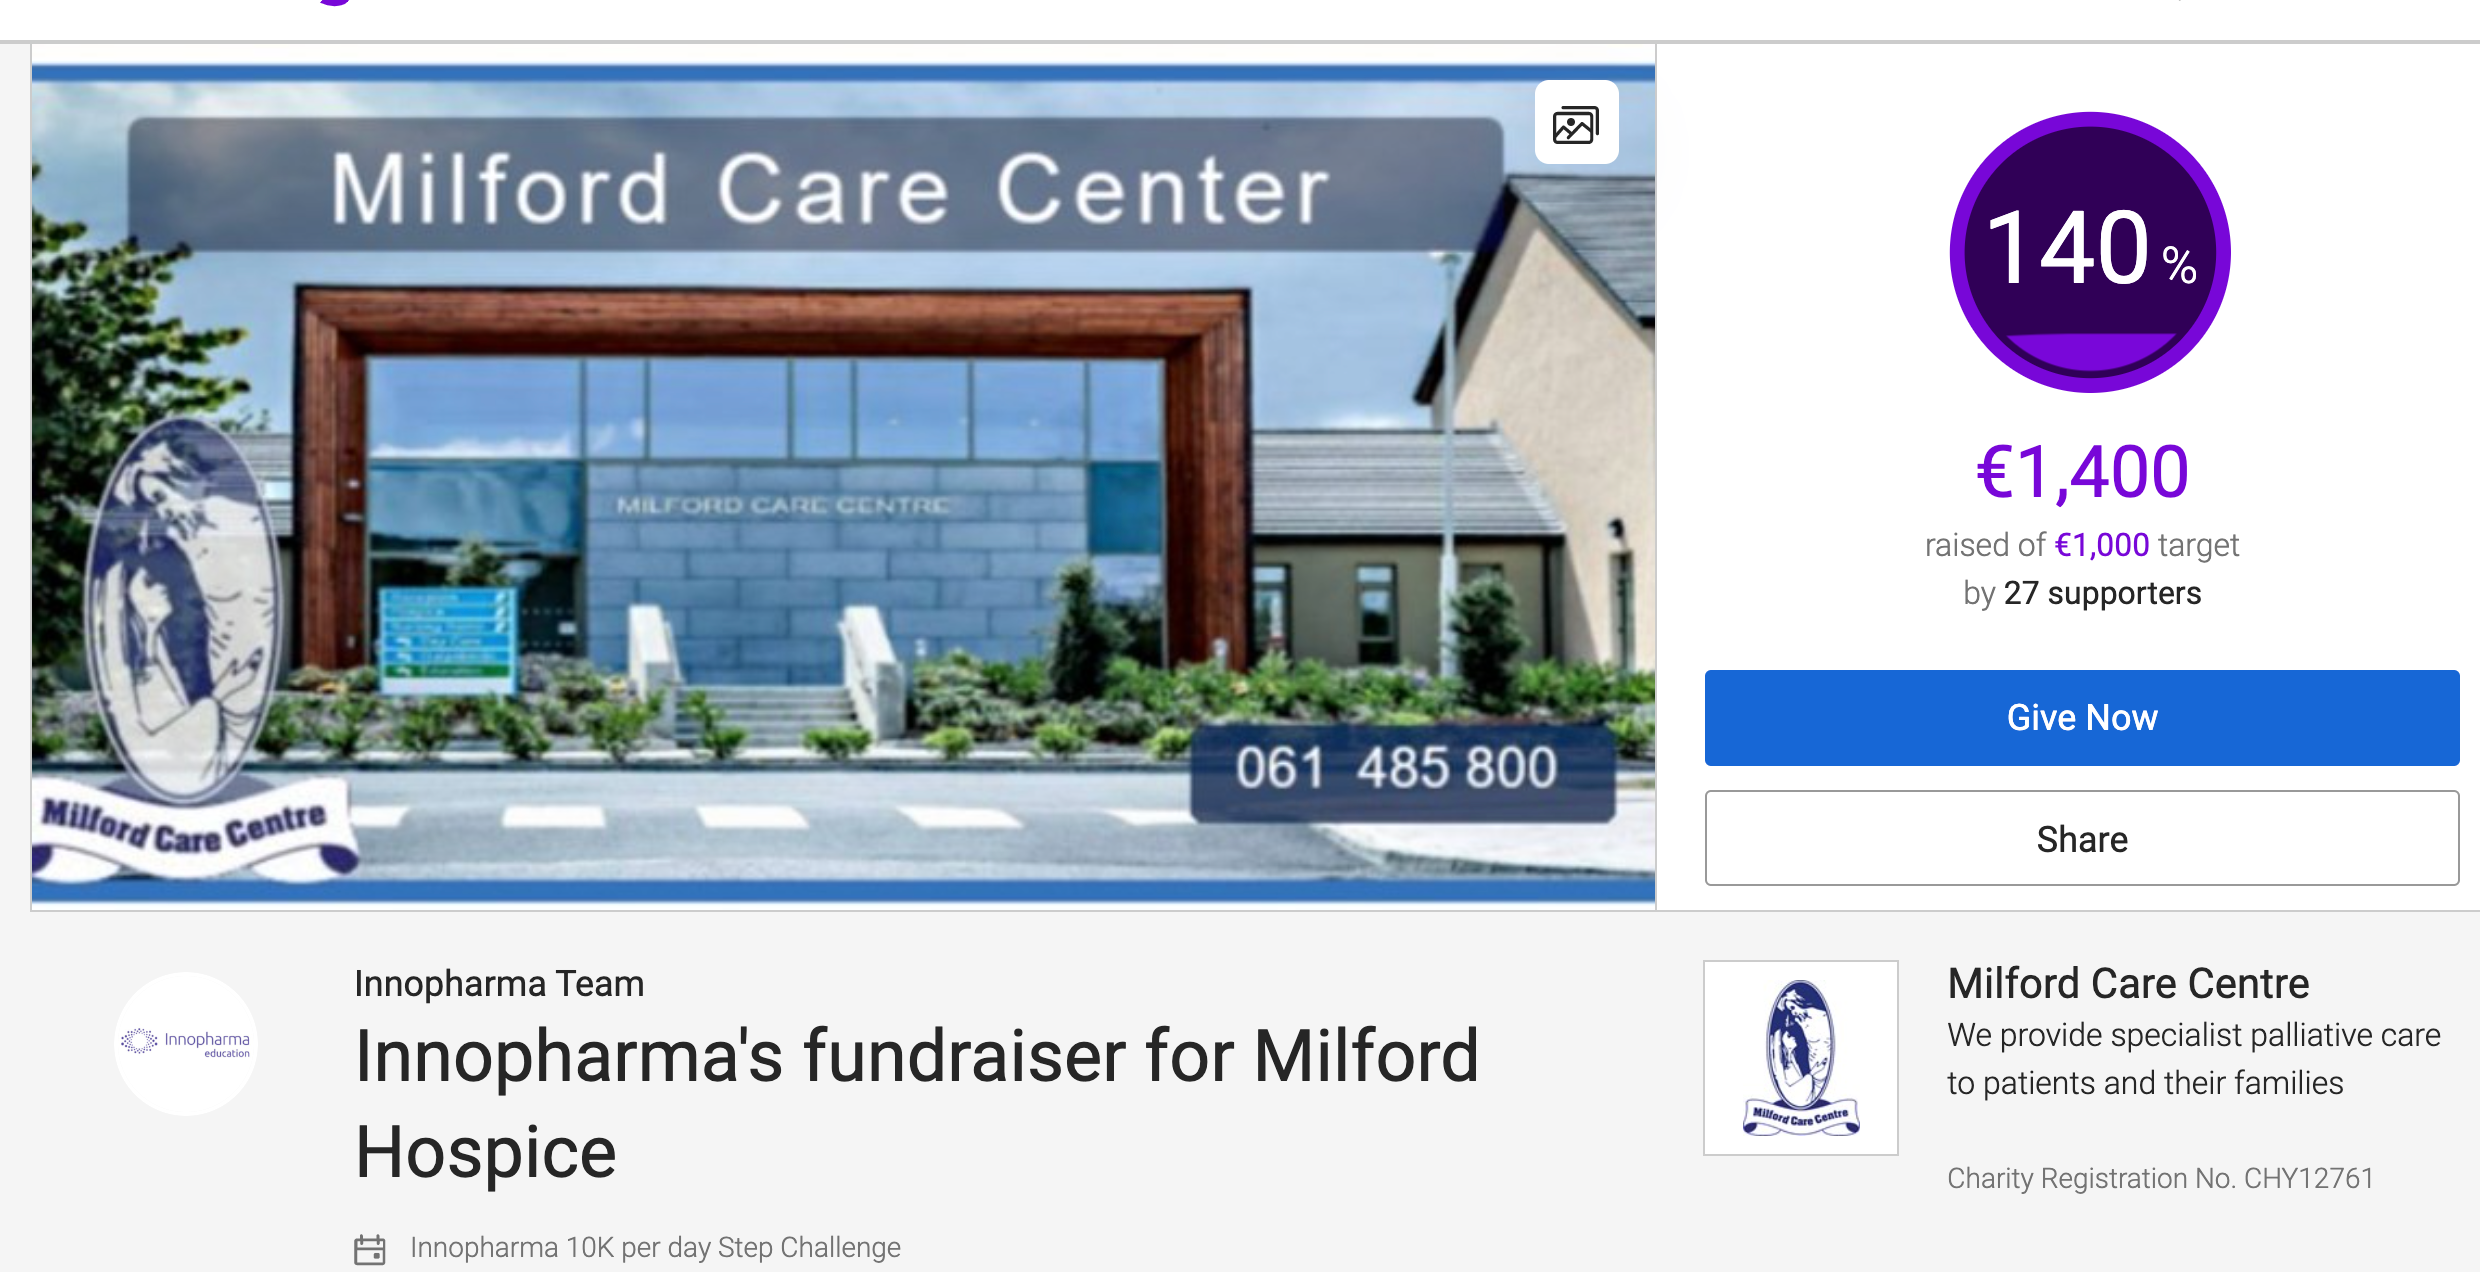 MILFORD CARE